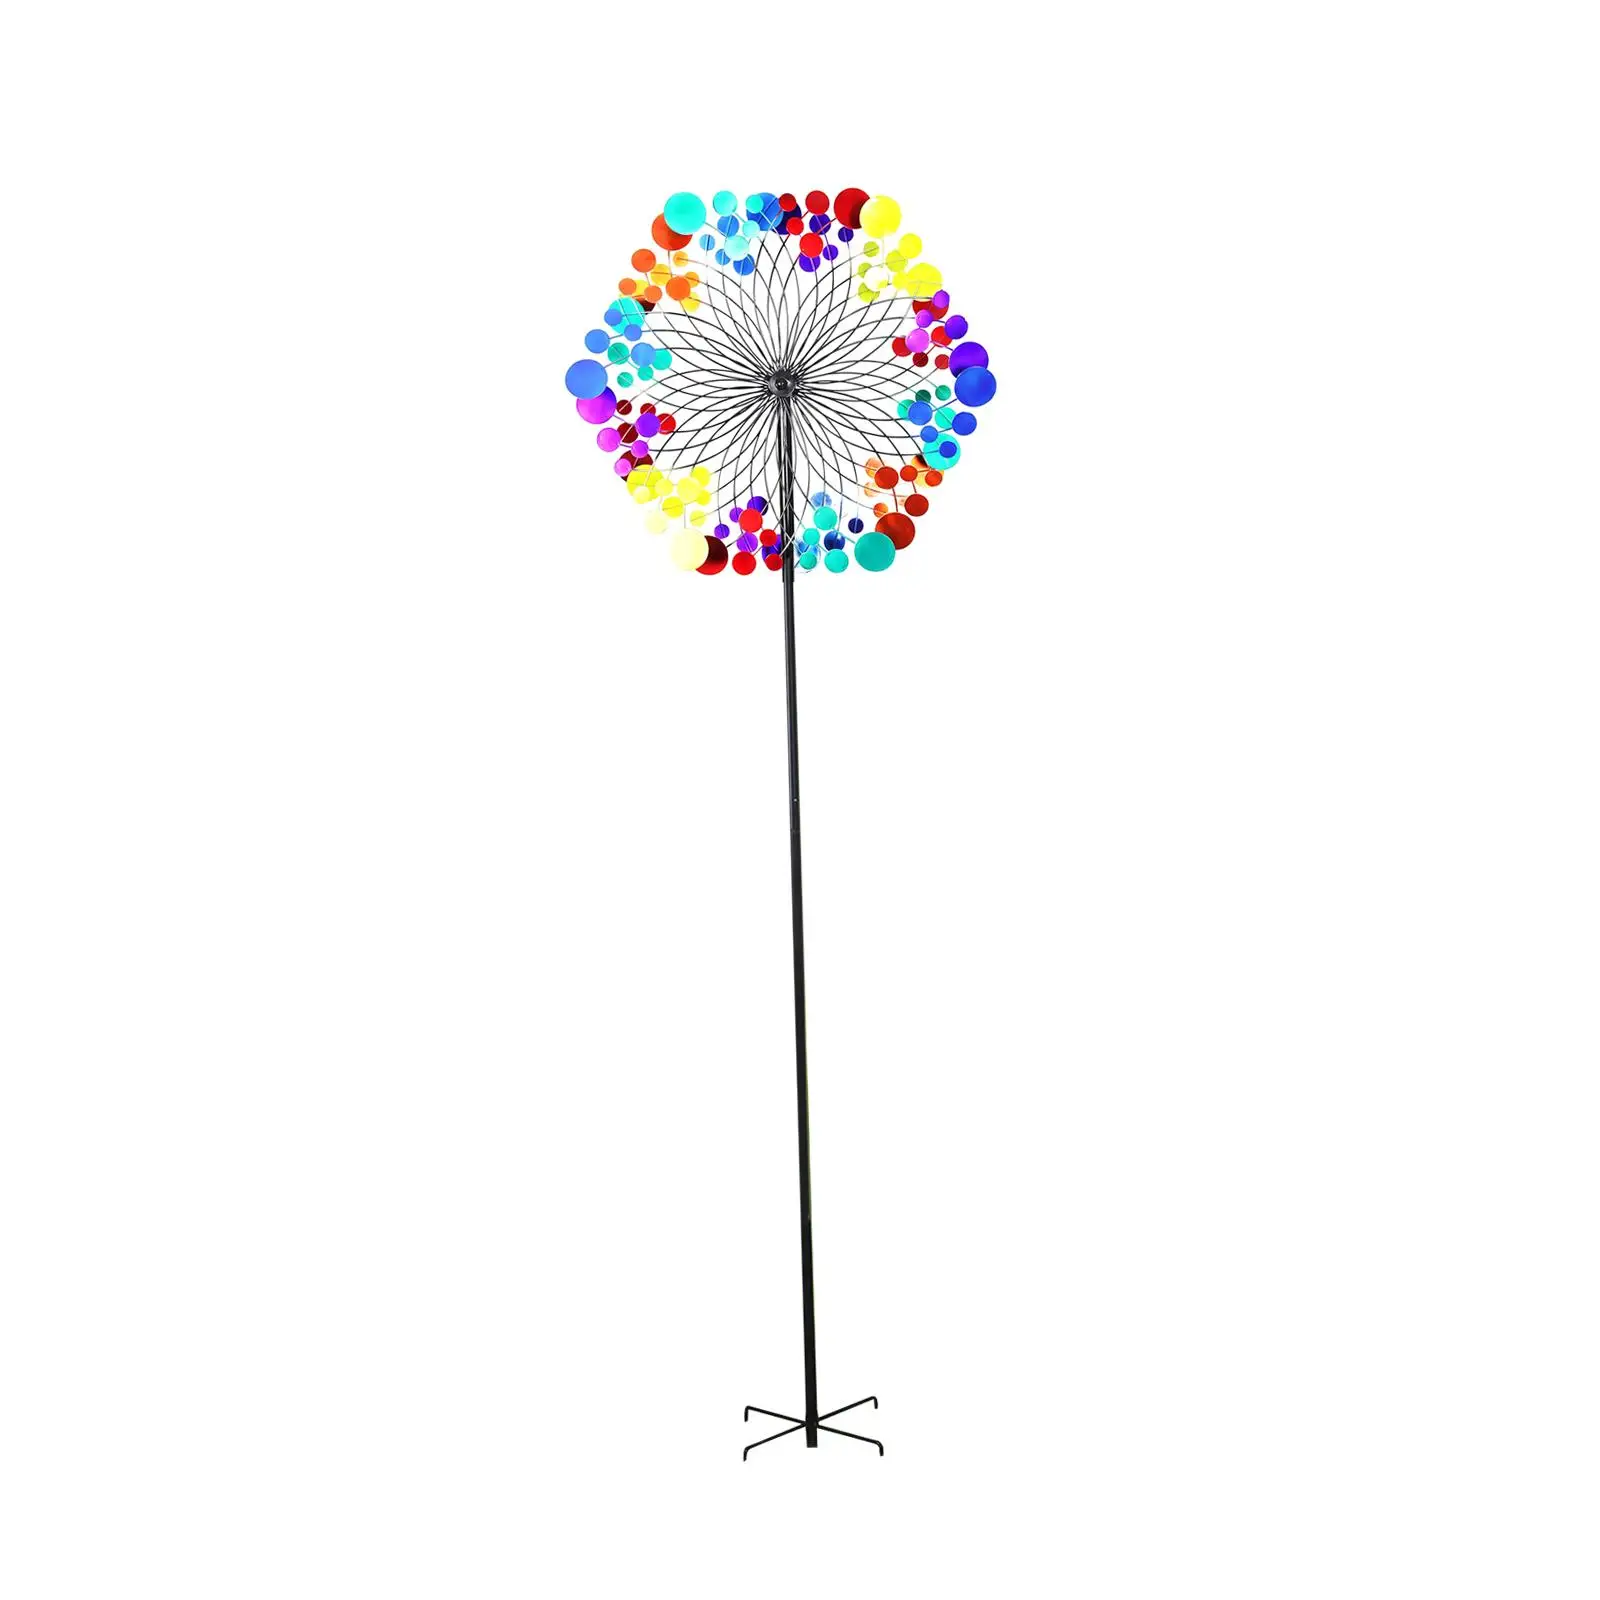 Decor Windmill Crafts Weatherproof Multi Color Metal Decor Windmill for Lawn Yard Garden Decorations Ornament Housewarming Gifts